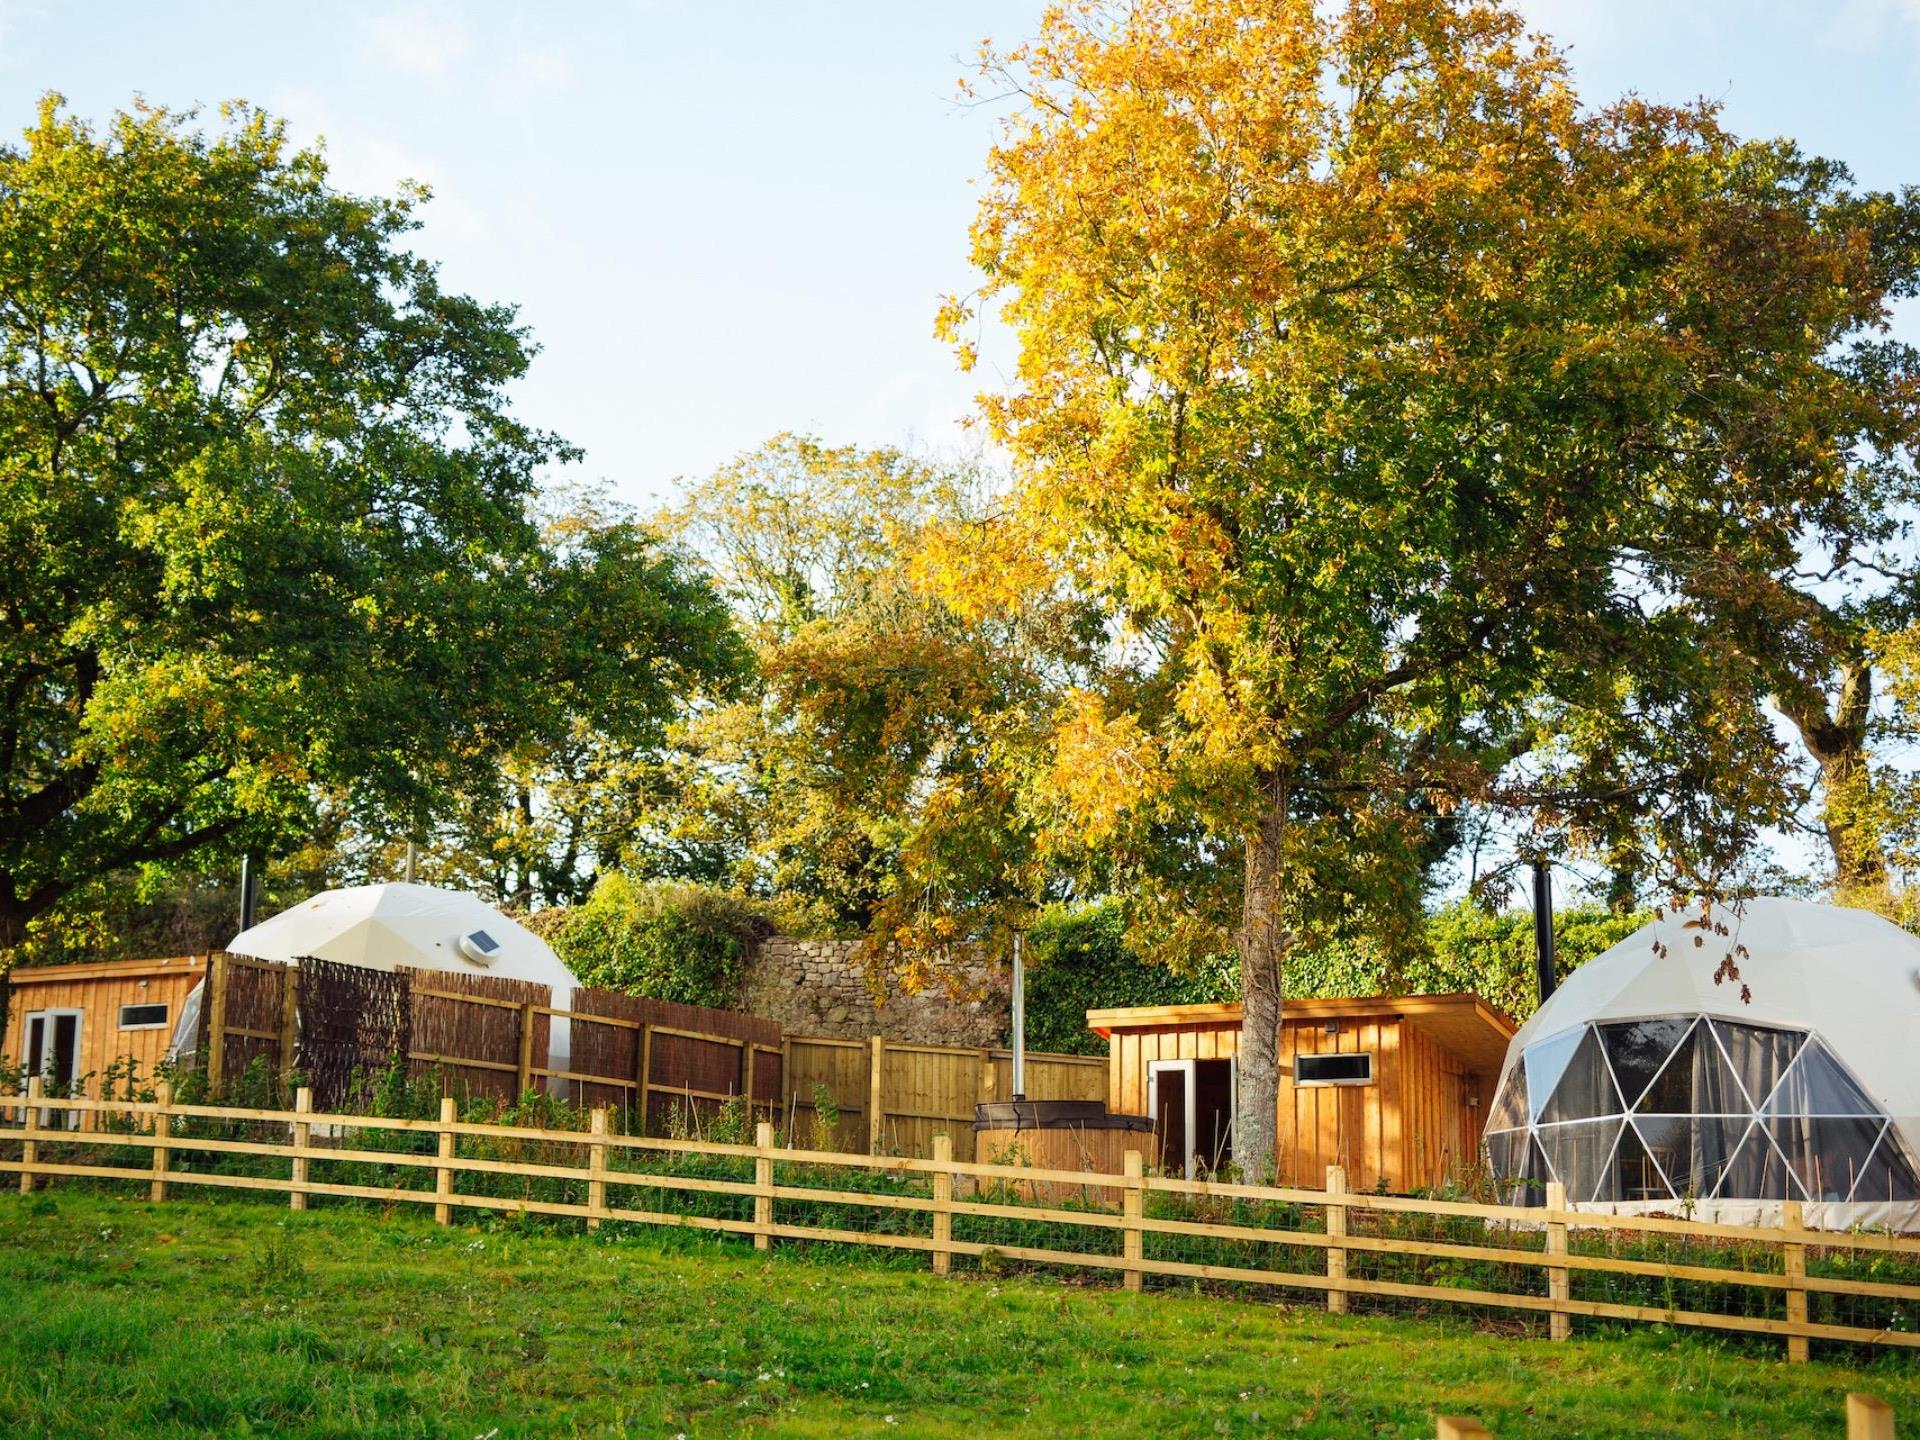 Our luxury Geodomes with wood fired hot tubs